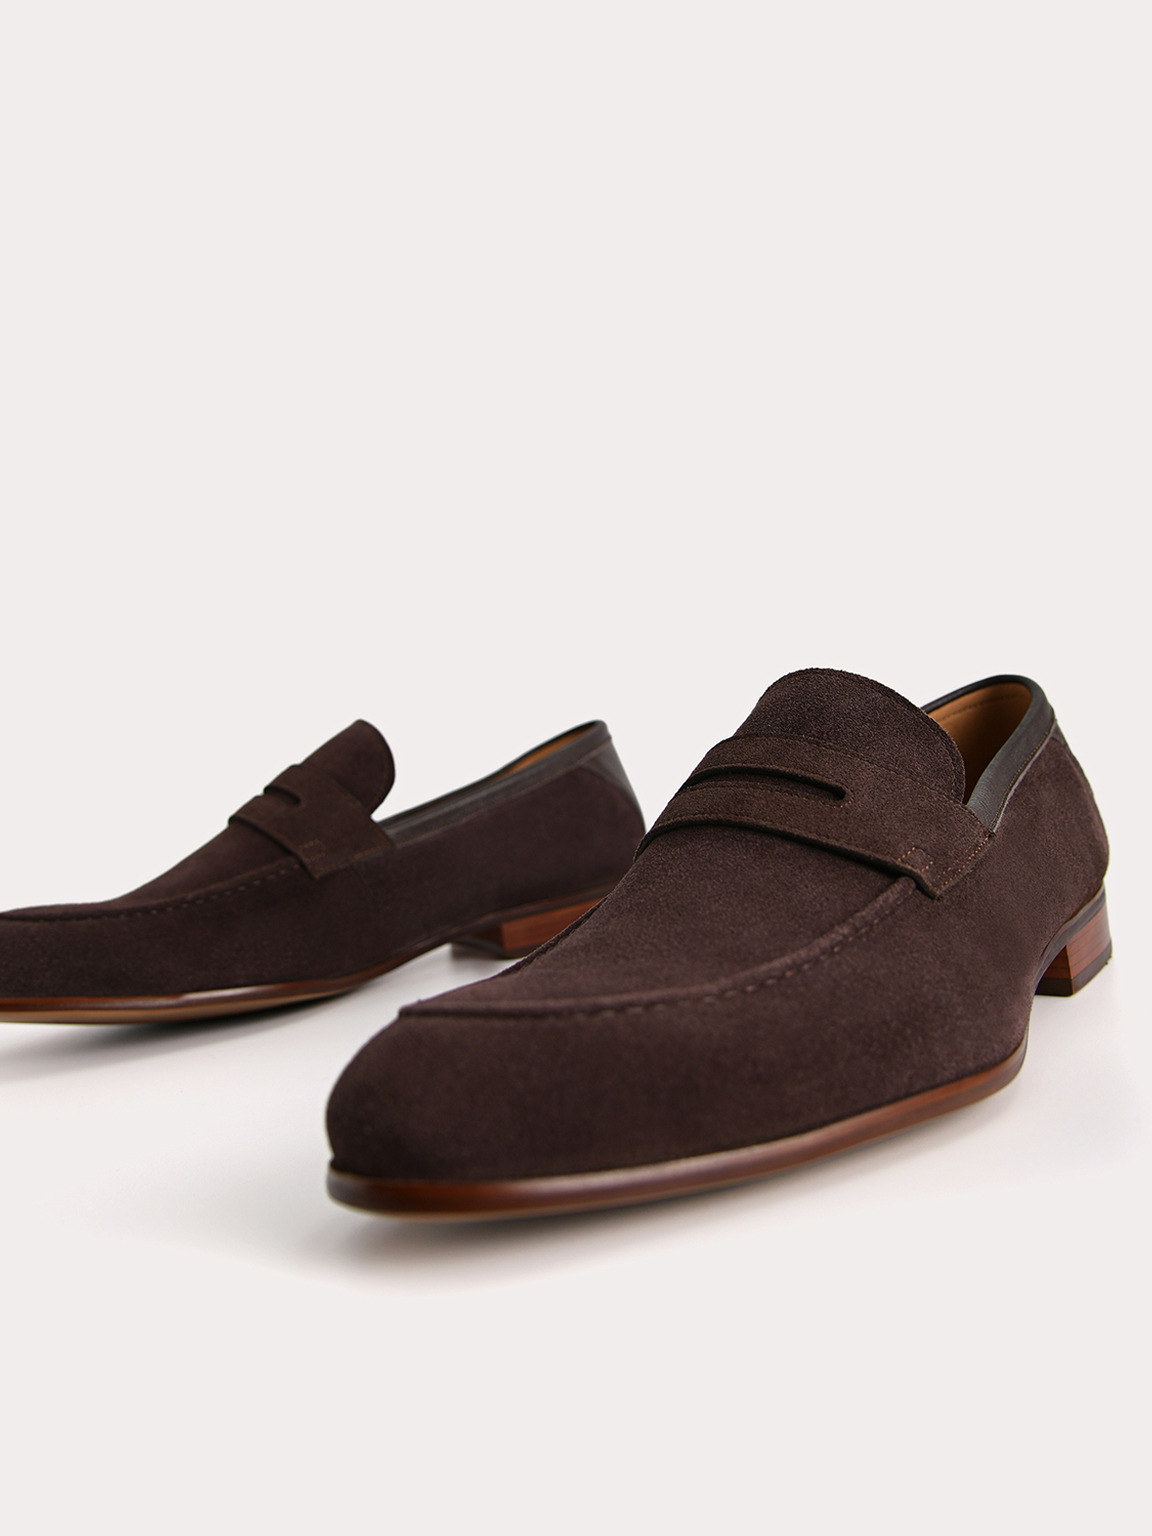 Suede Penny Loafers, Dark Brown